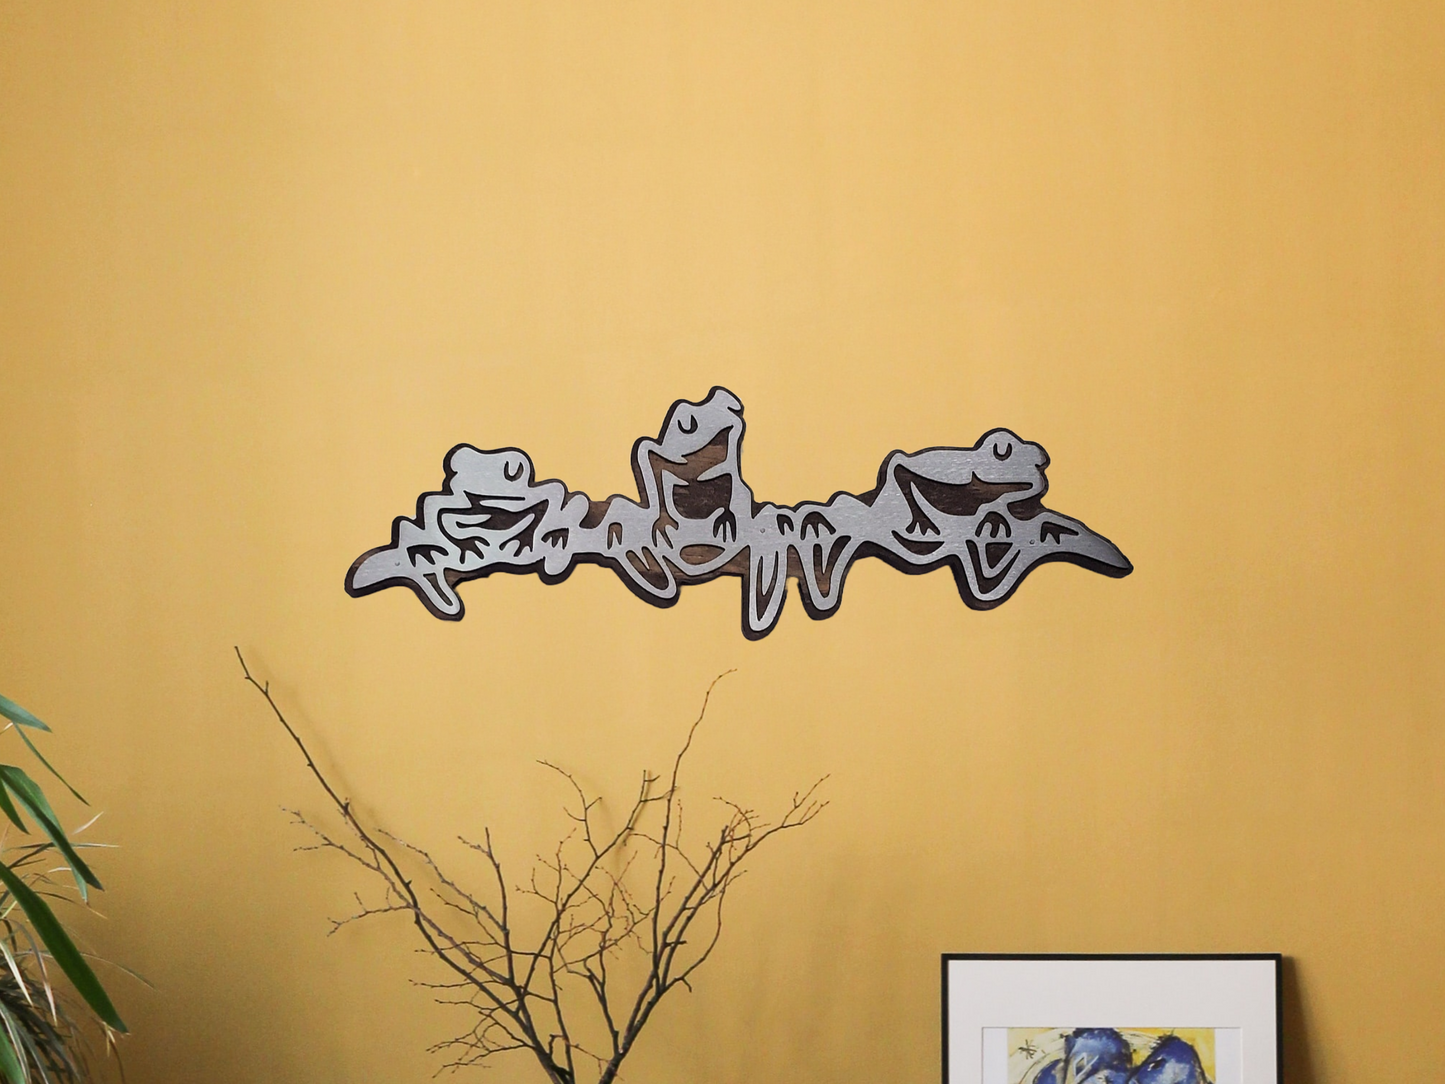 Frogs on a branch scene wall art  metal frog wall hanging     Made in USA    metal on wood rustic wall décor cabin decor lake home